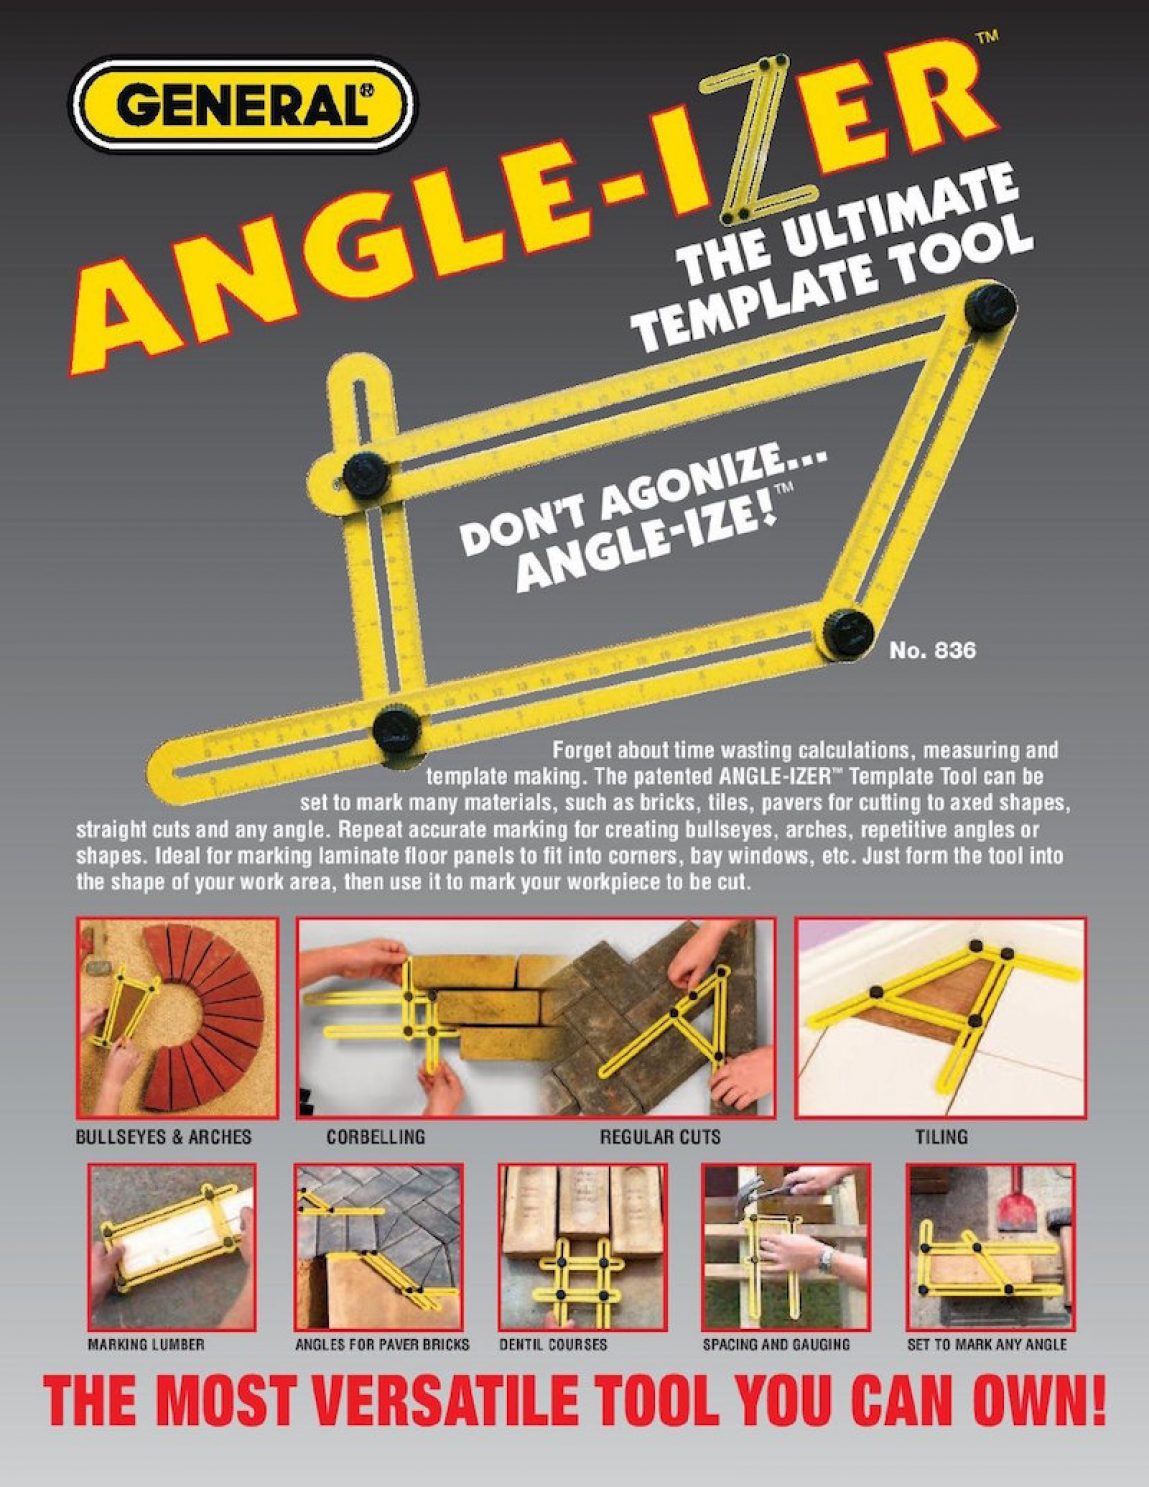 The General Tools: Angle izer Helps Prevent Inaccurate Cuts For Builders